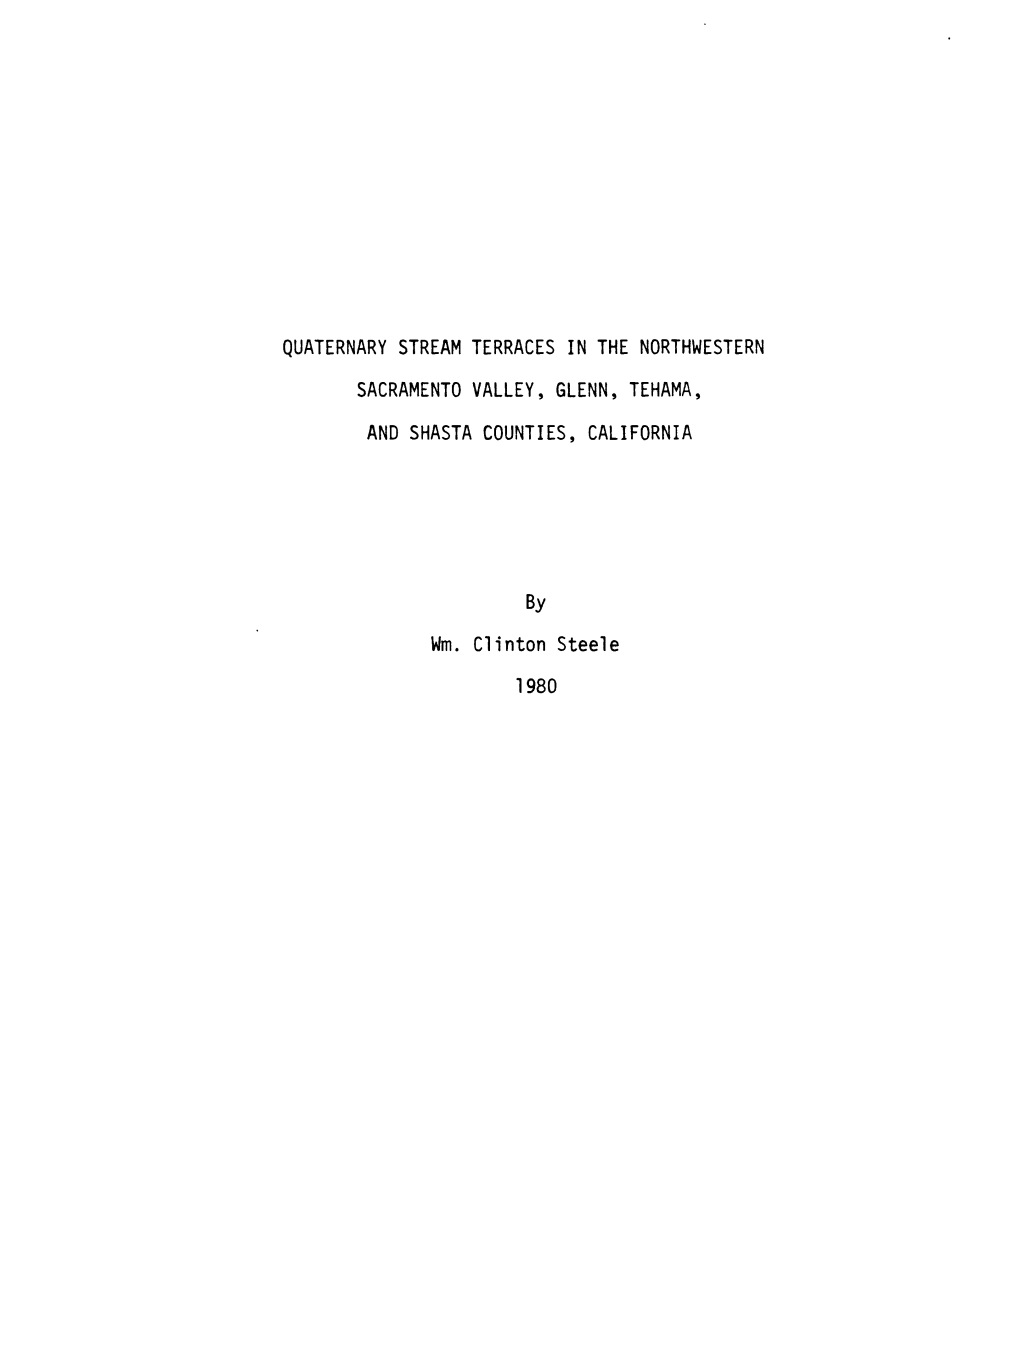 Wm. Clinton Steele 1980 Contents Page Abstract